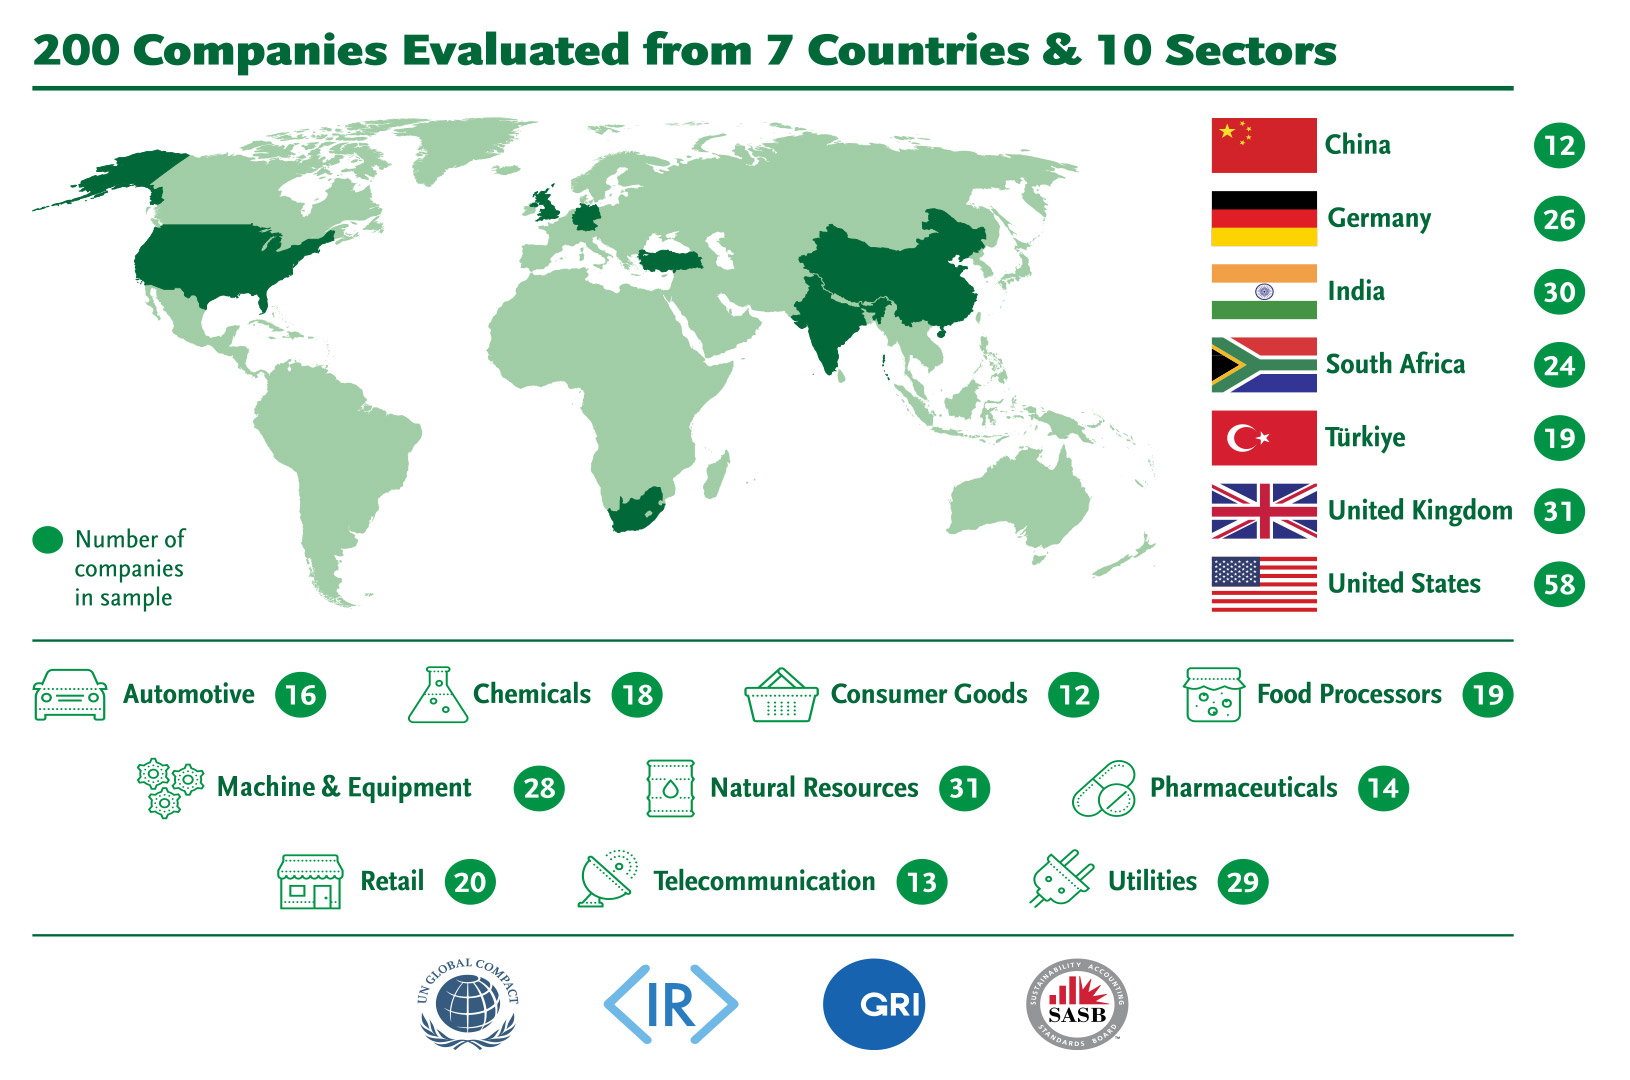 200 Companies Evaluated from 7 Countries and 10 Sectors